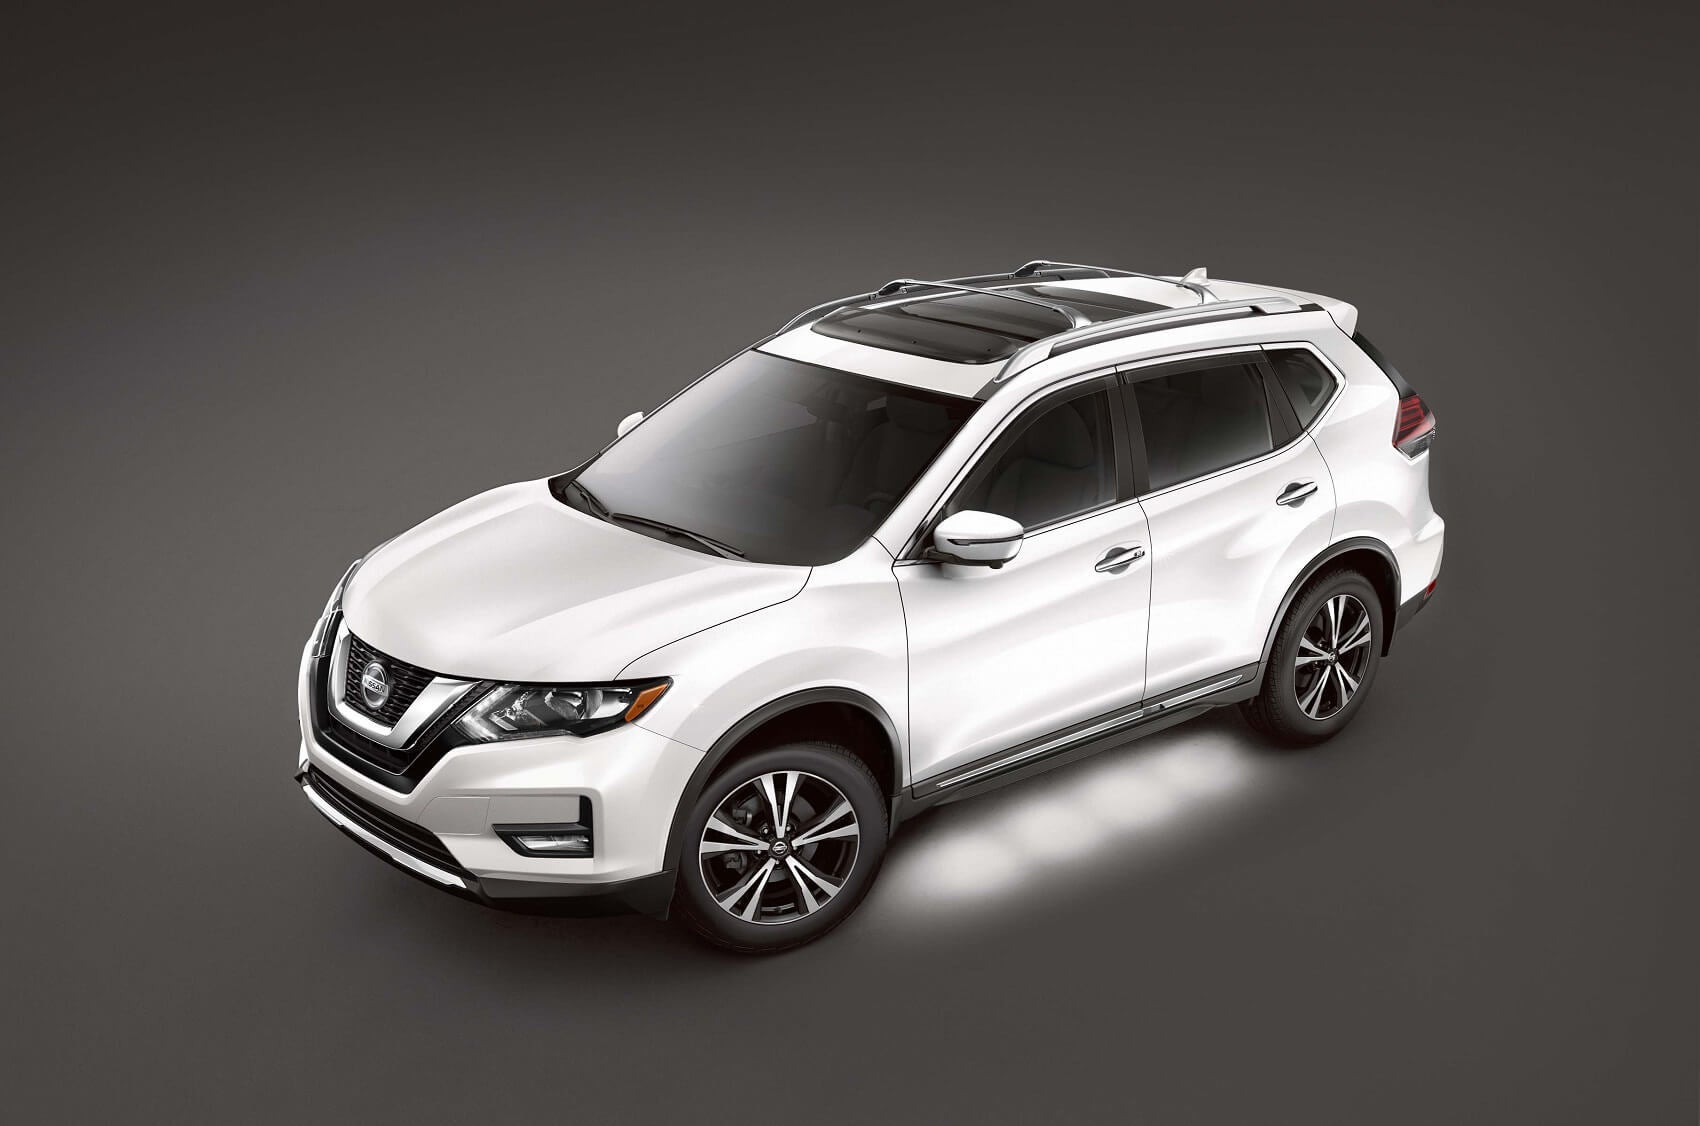 Used Nissan Rogue near Crawfordsville IN